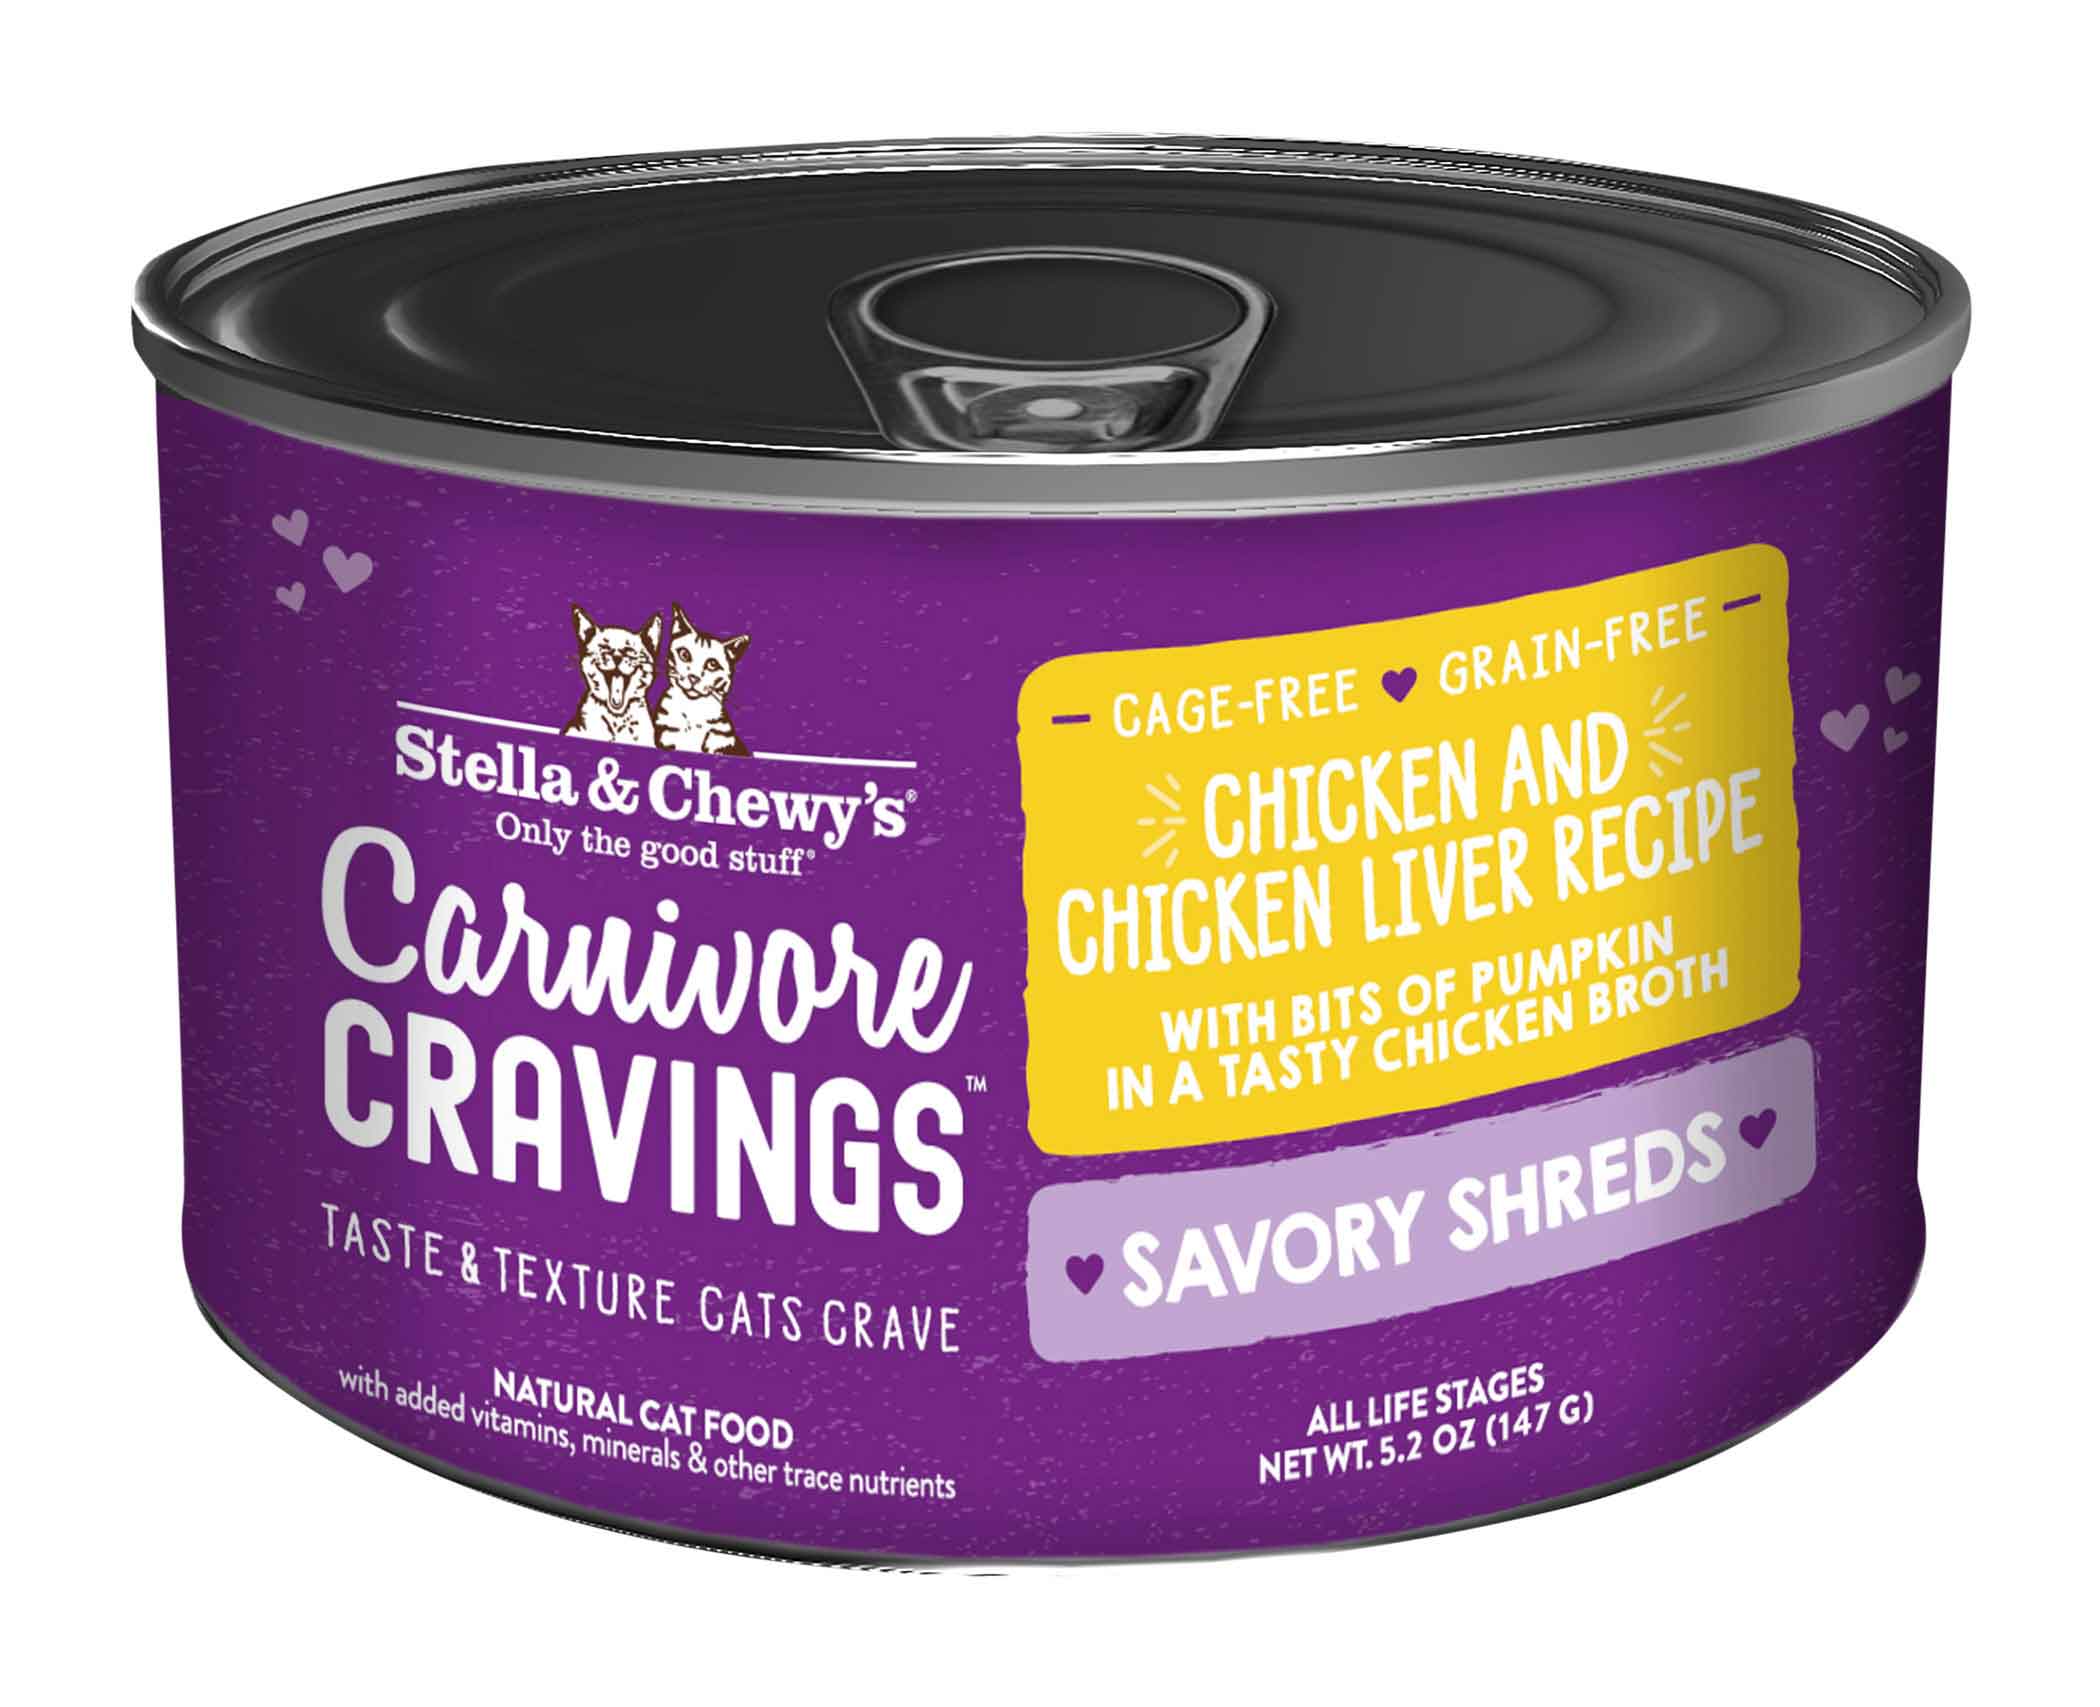 Stella & Chewy's Carnivore Cravings-Savory Shreds Chicken & Chicken Liver Dinner in Broth Wet Cat Food, 5.2 Ounces